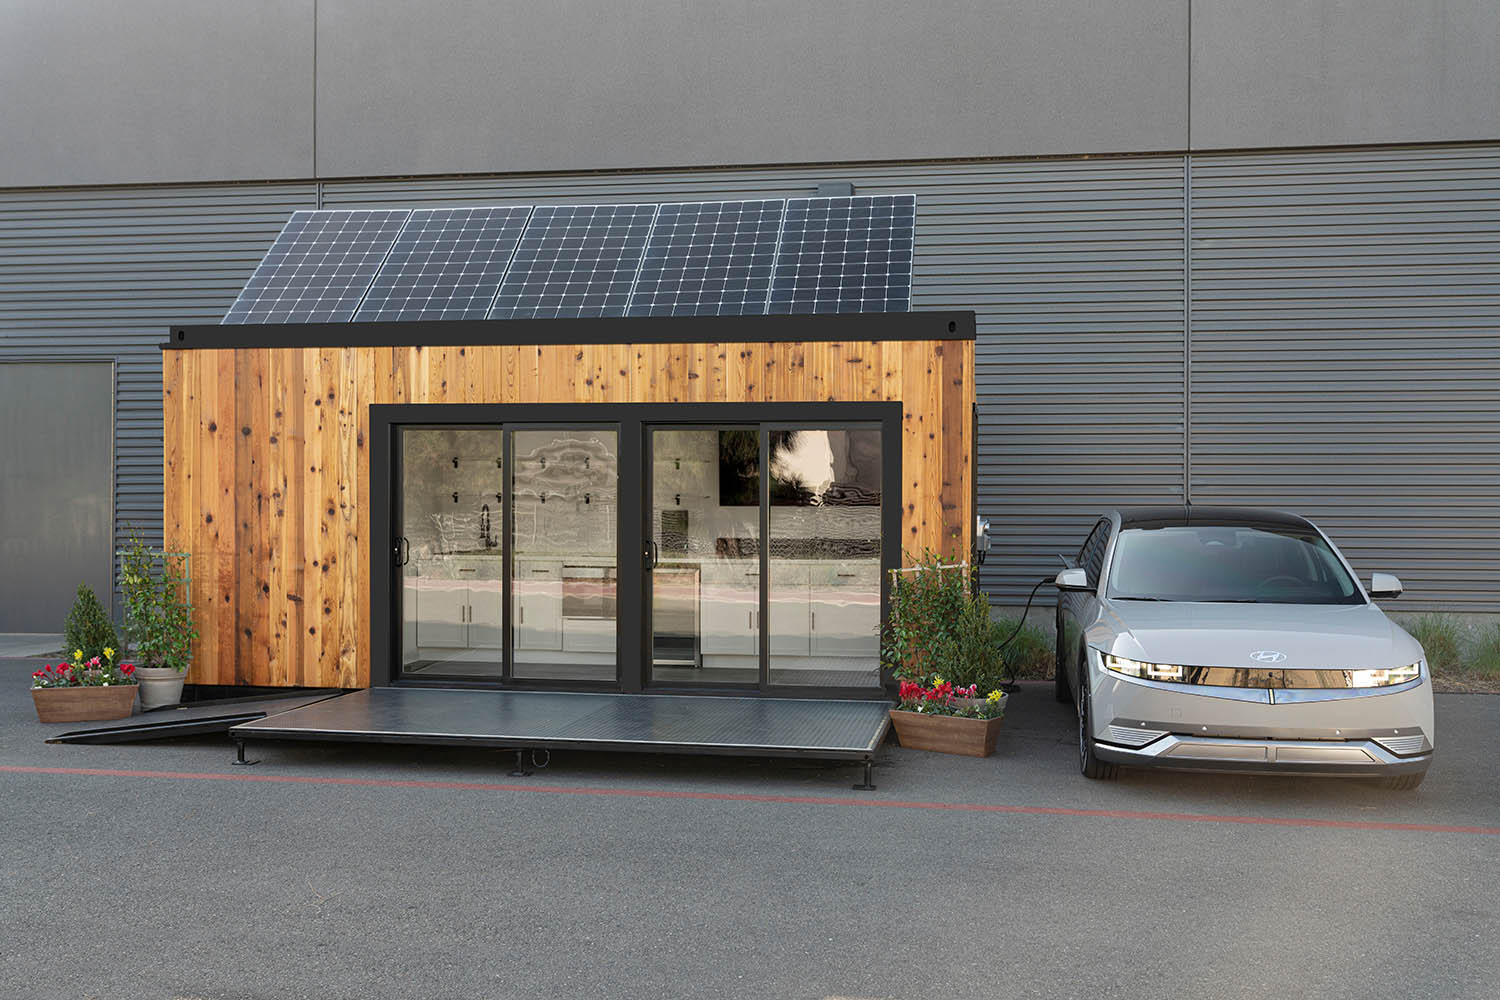 A gray Hyundai sedan plugged into a house equipped with rooftop solar panels.